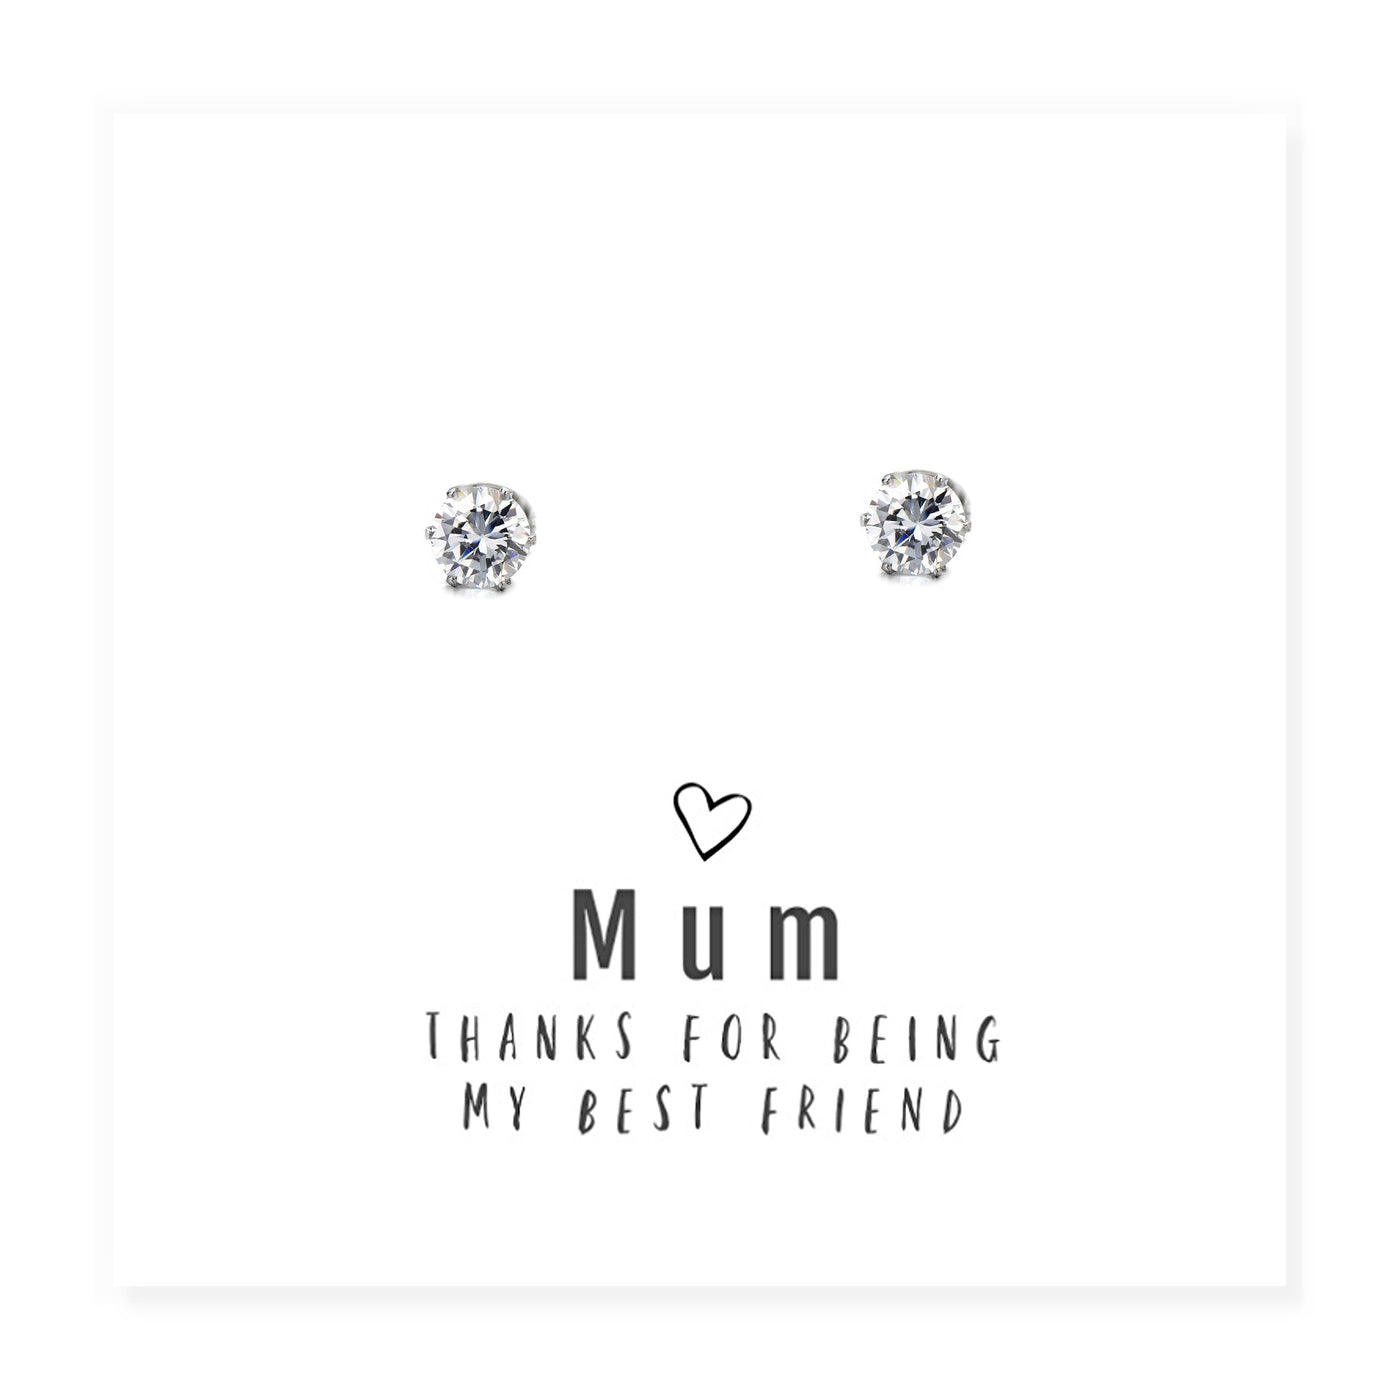 Mum Thanks For Being My Best Friend - Earrings & Message Card